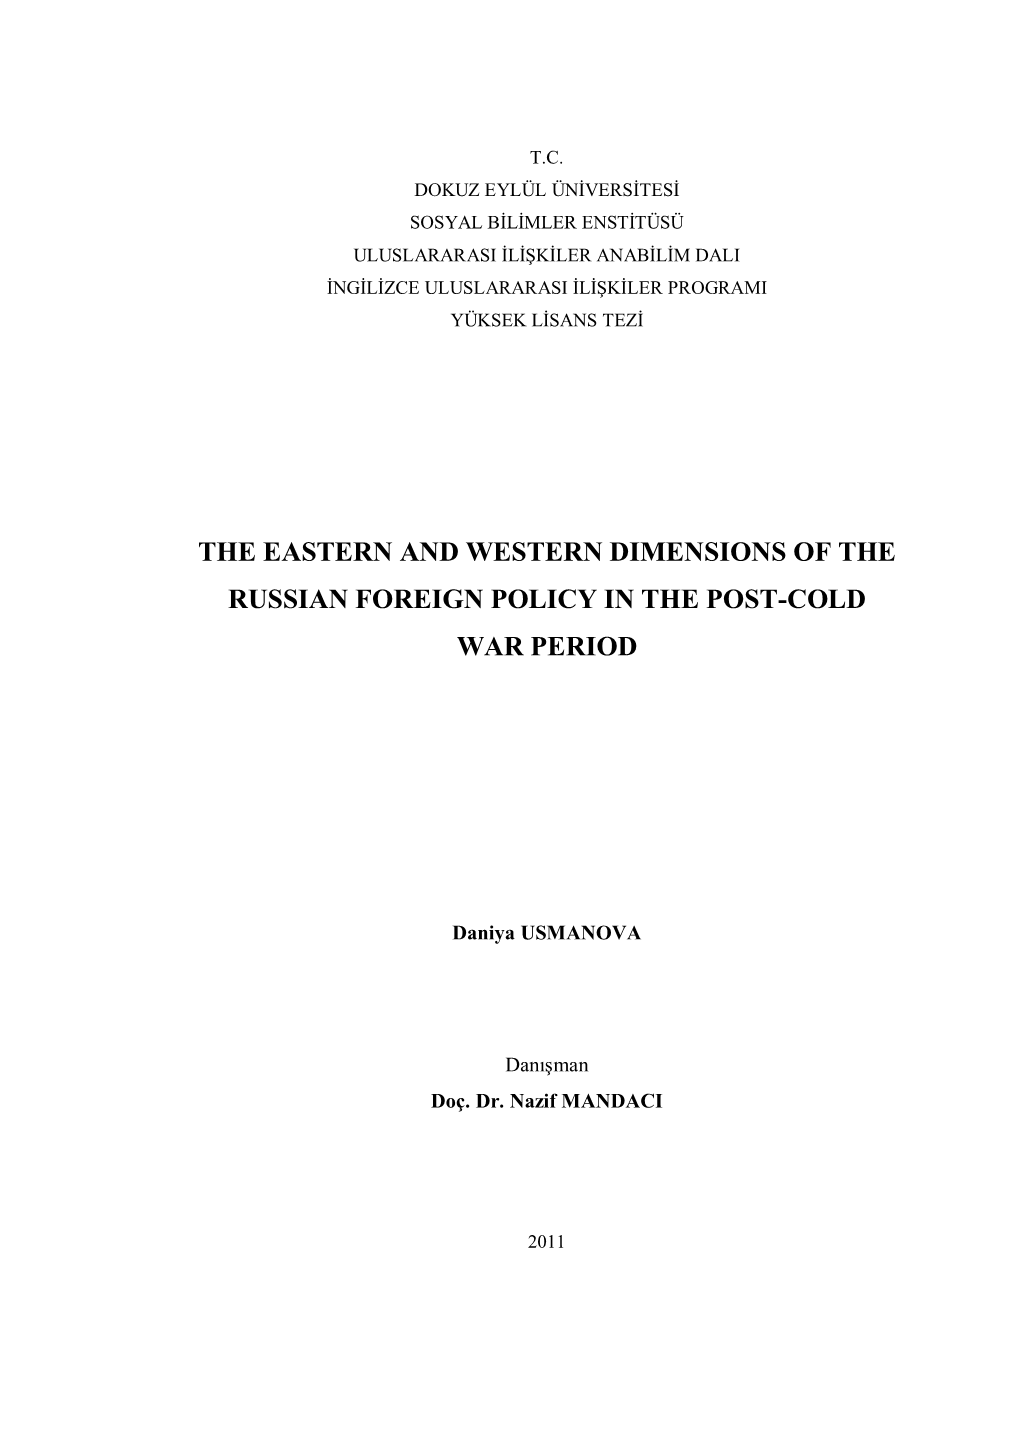 The Eastern and Western Dimensions of the Russian Foreign Policy in the Post-Cold War Period